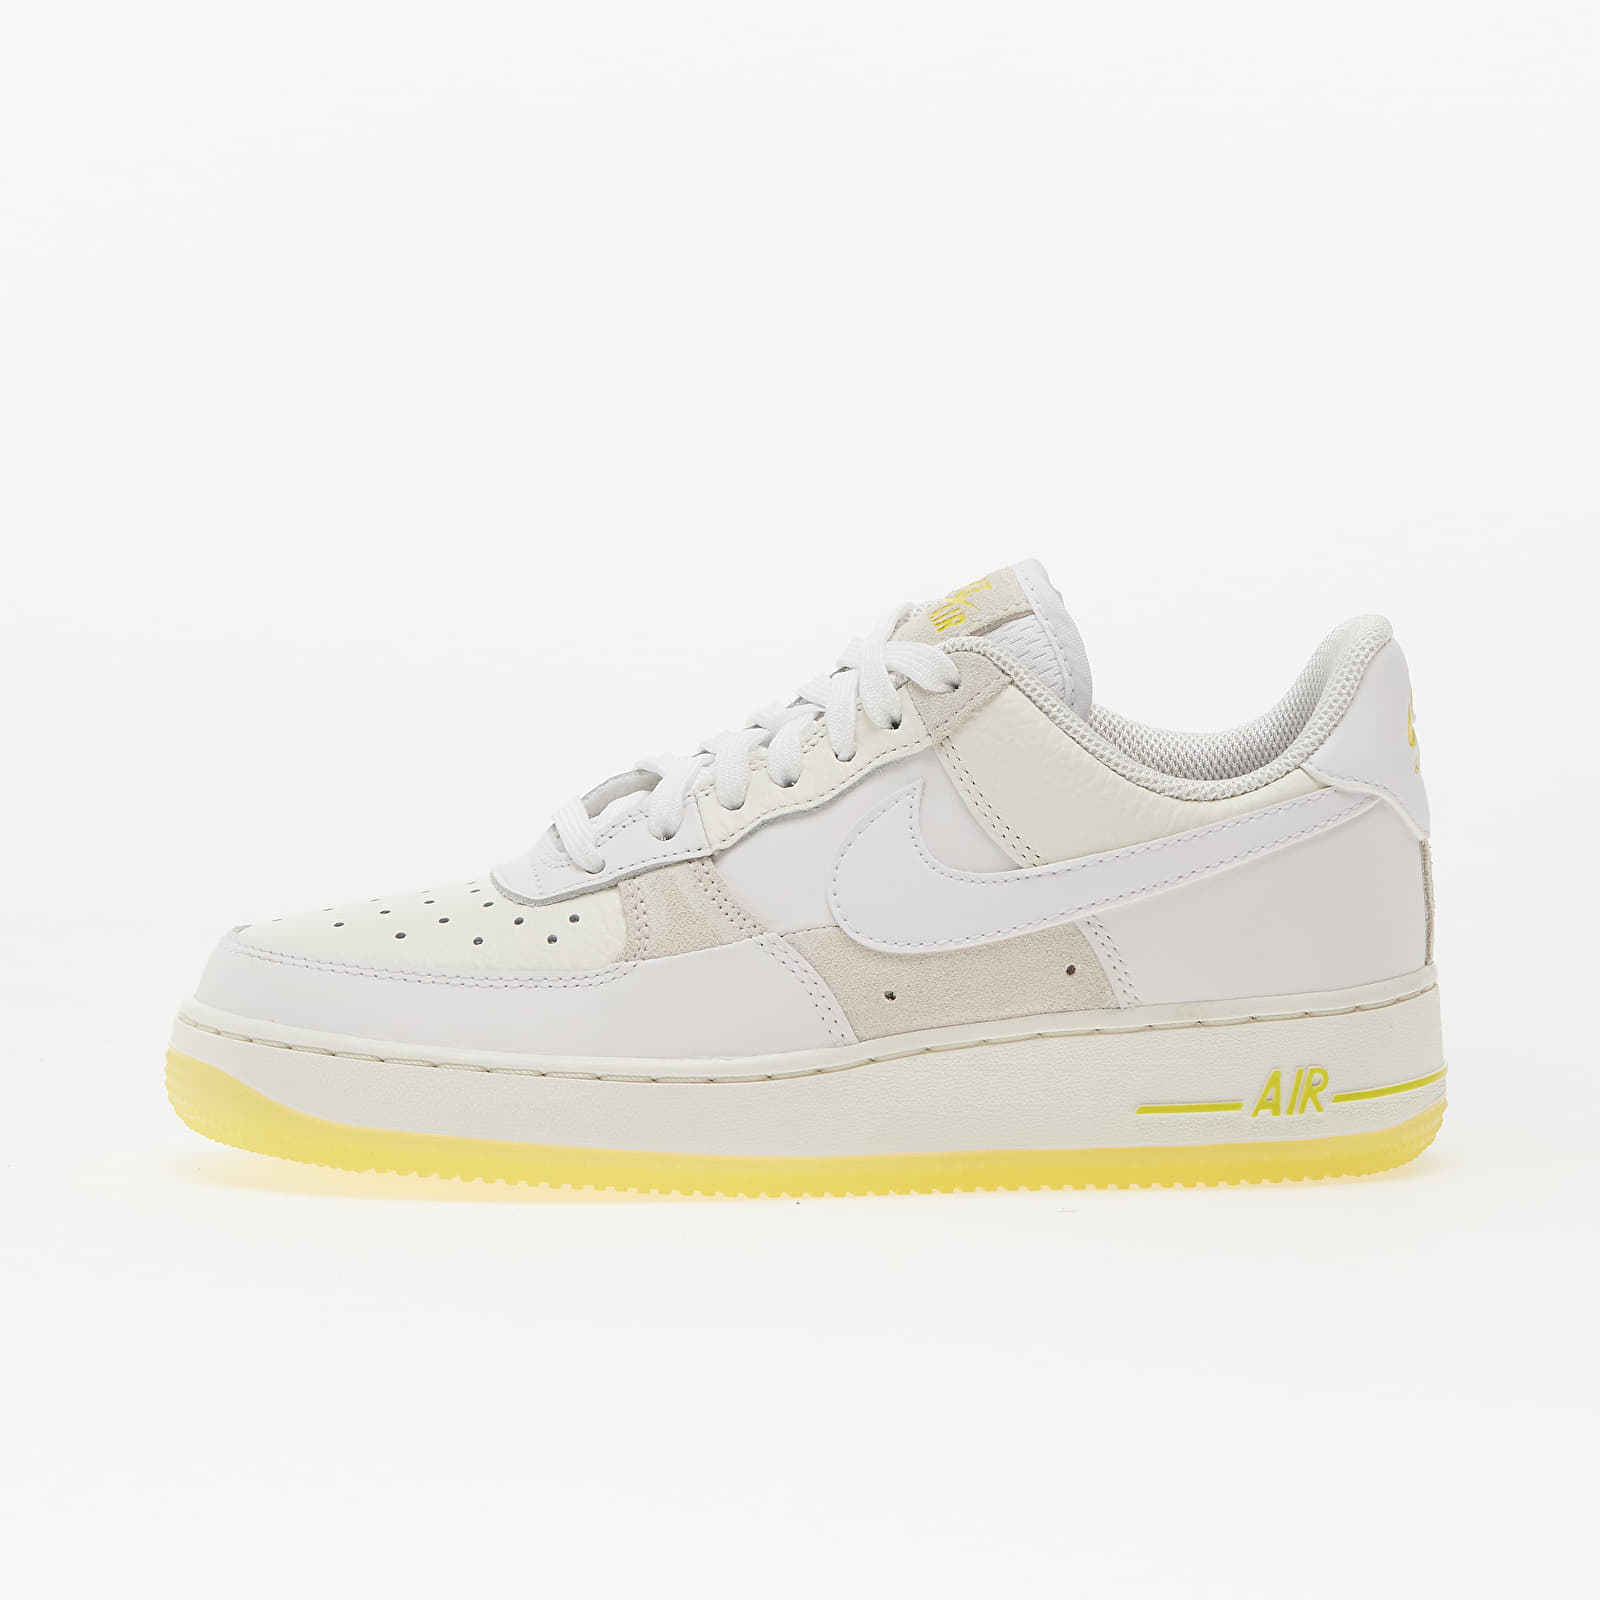 Nike Wmns Air Force 1 ’07 Low